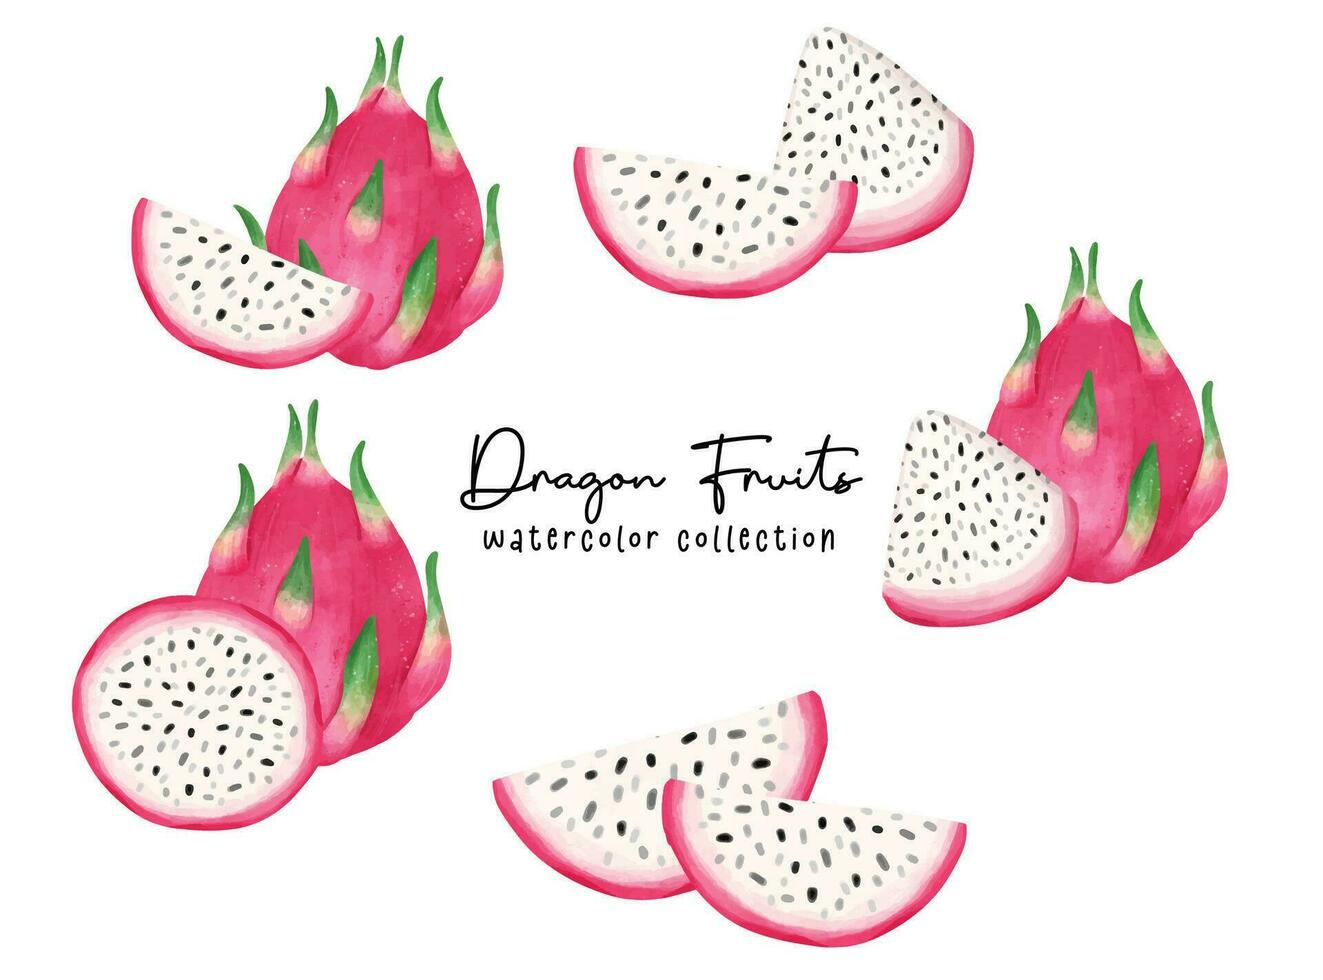 Watercolor Dragon Fruit Collection. Exotic Tropical Fruits Illustration vector